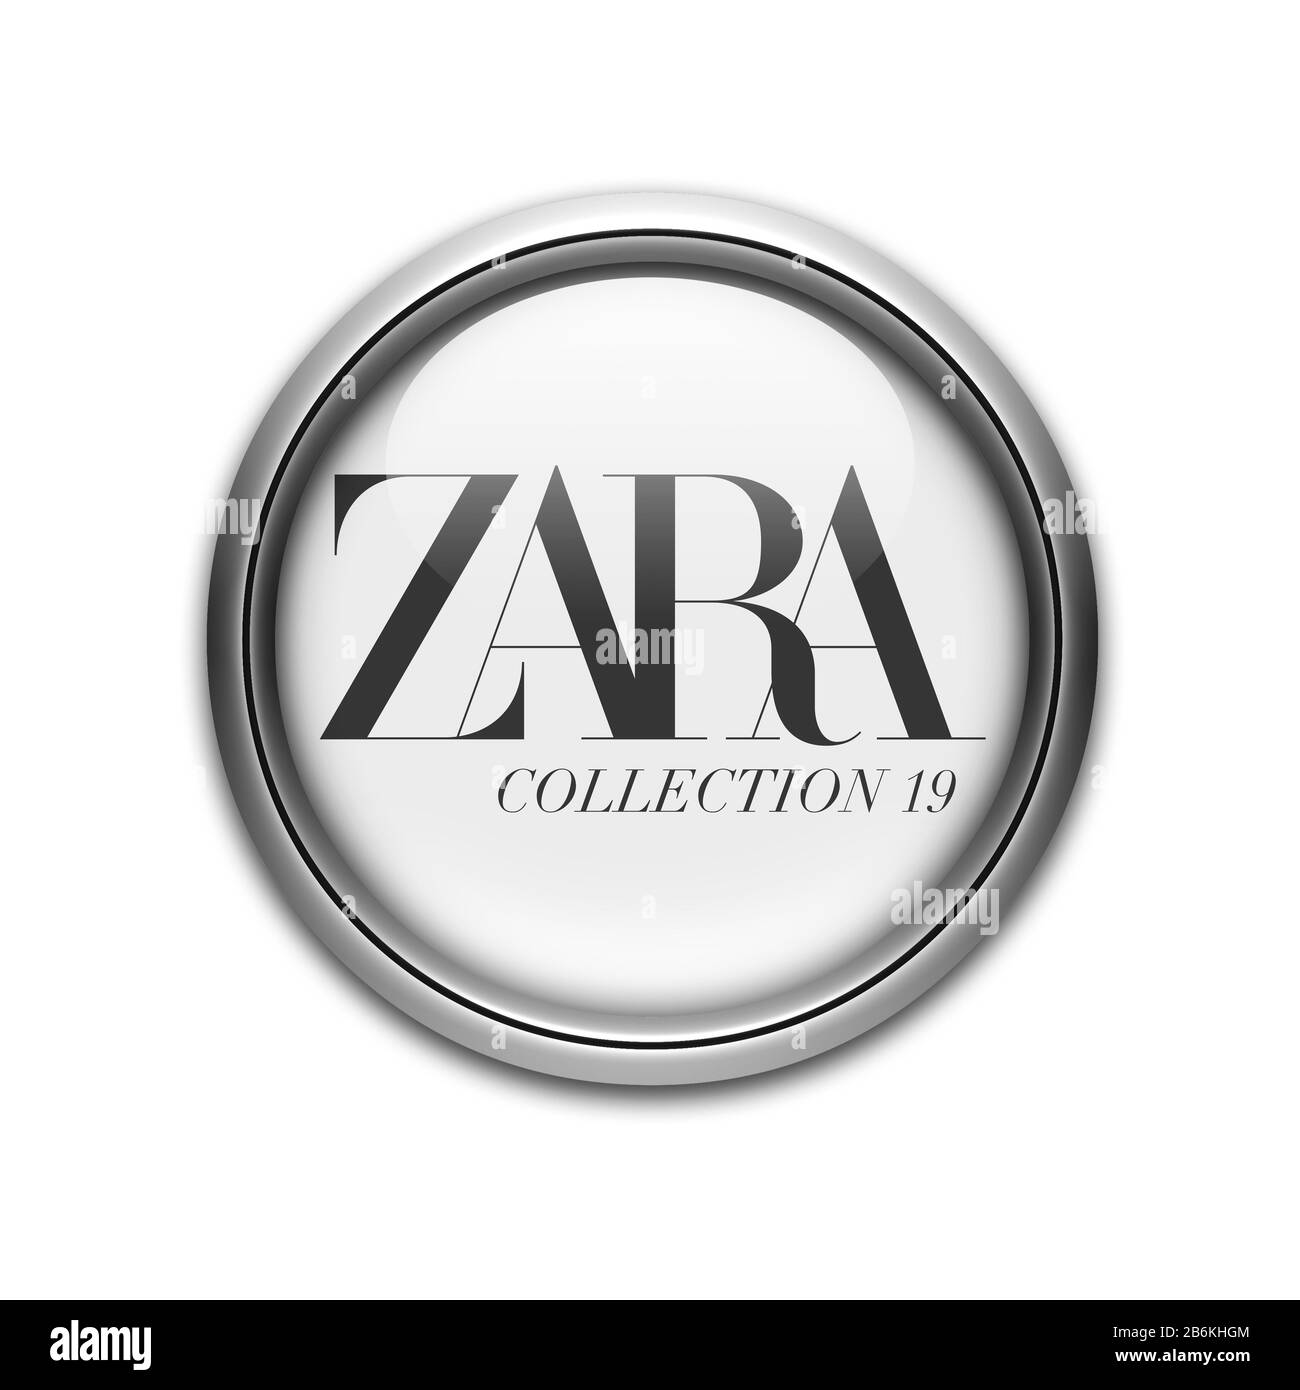 Zara Logo High Resolution Stock Photography and Images - Alamy